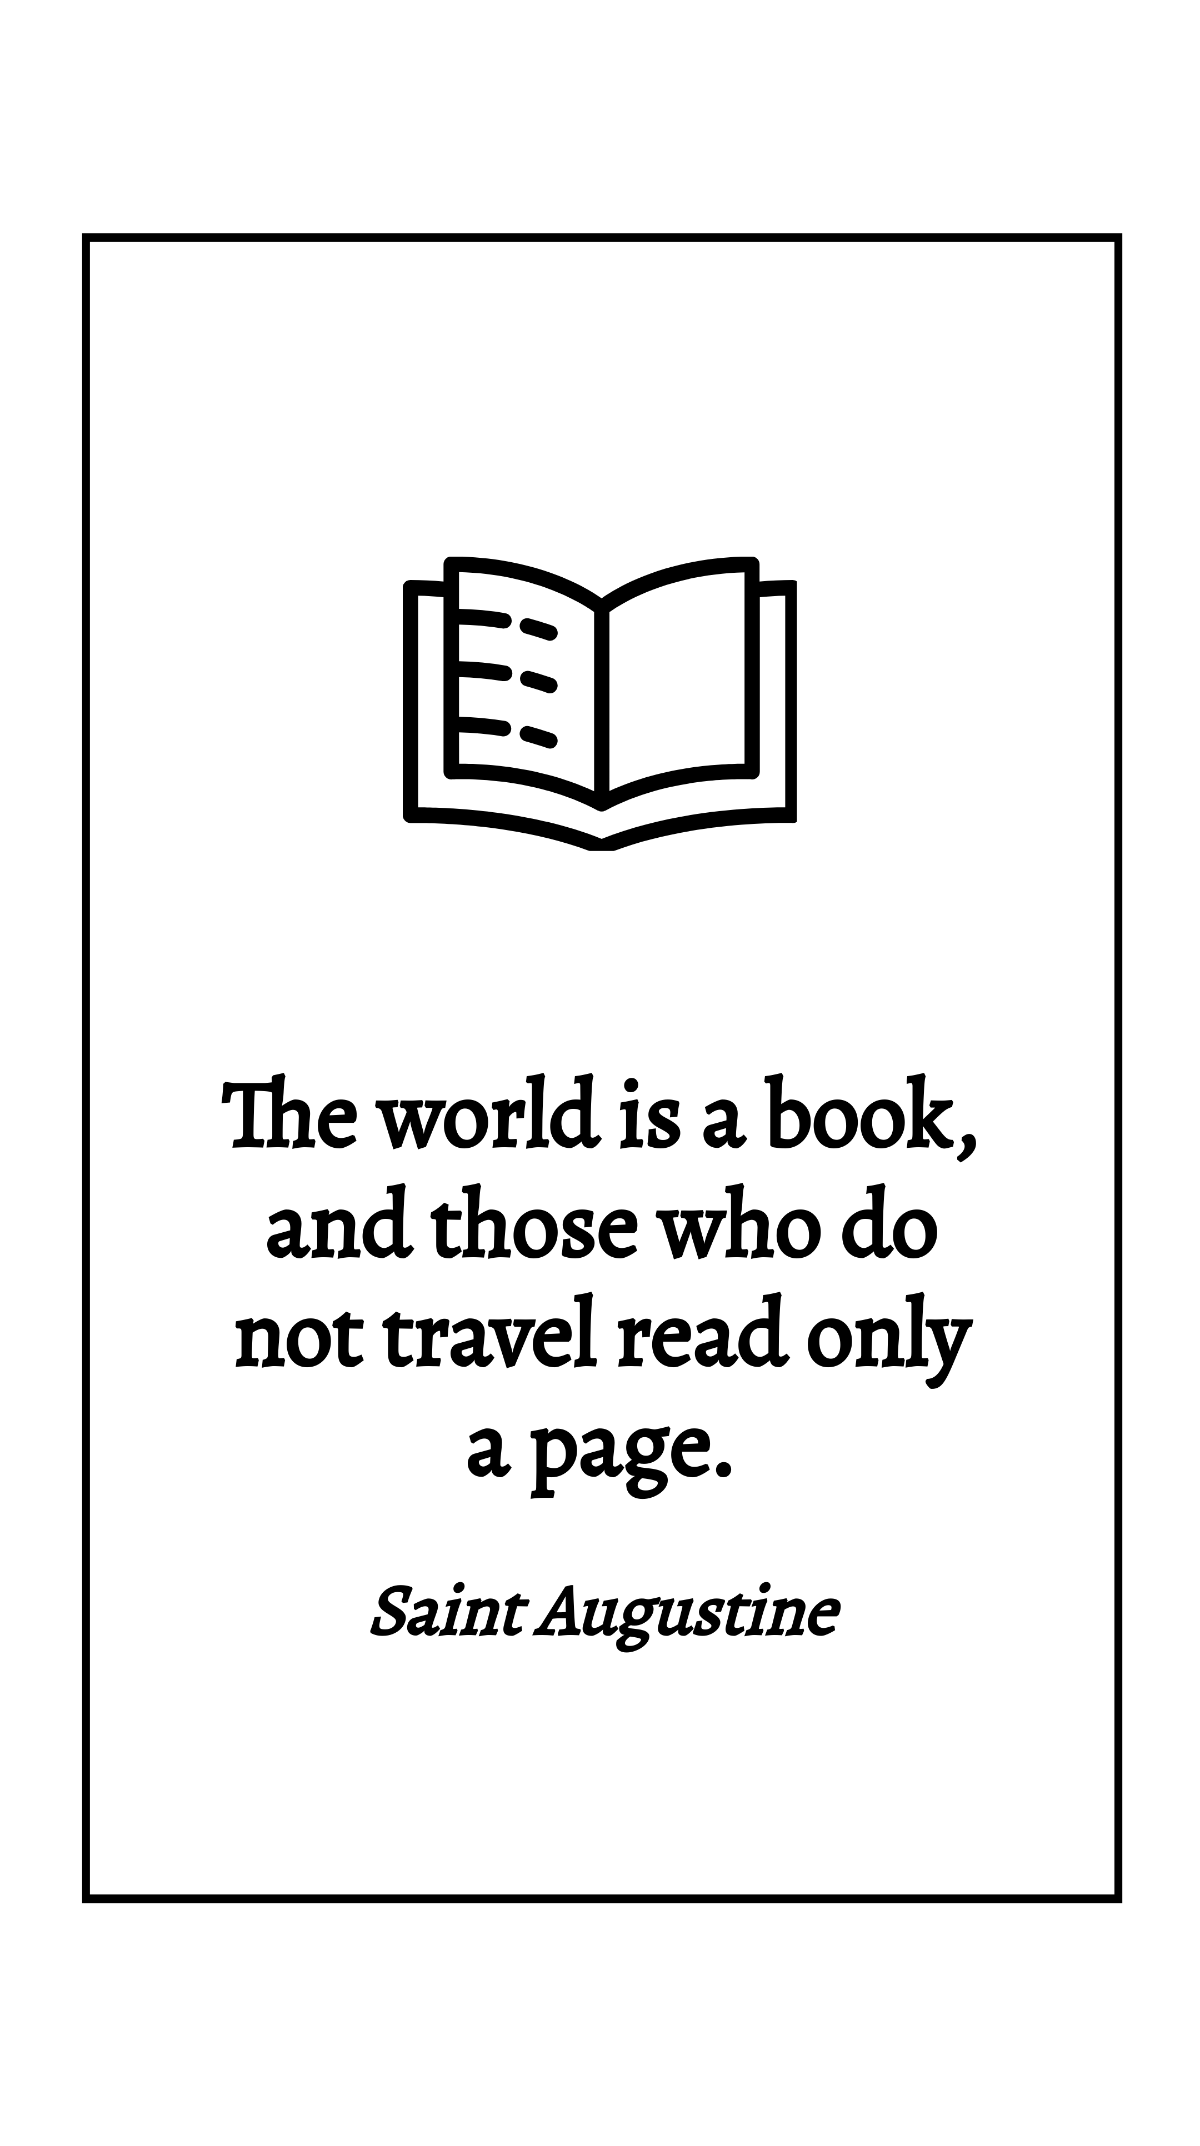 Saint Augustine - The world is a book, and those who do not travel read only a page.